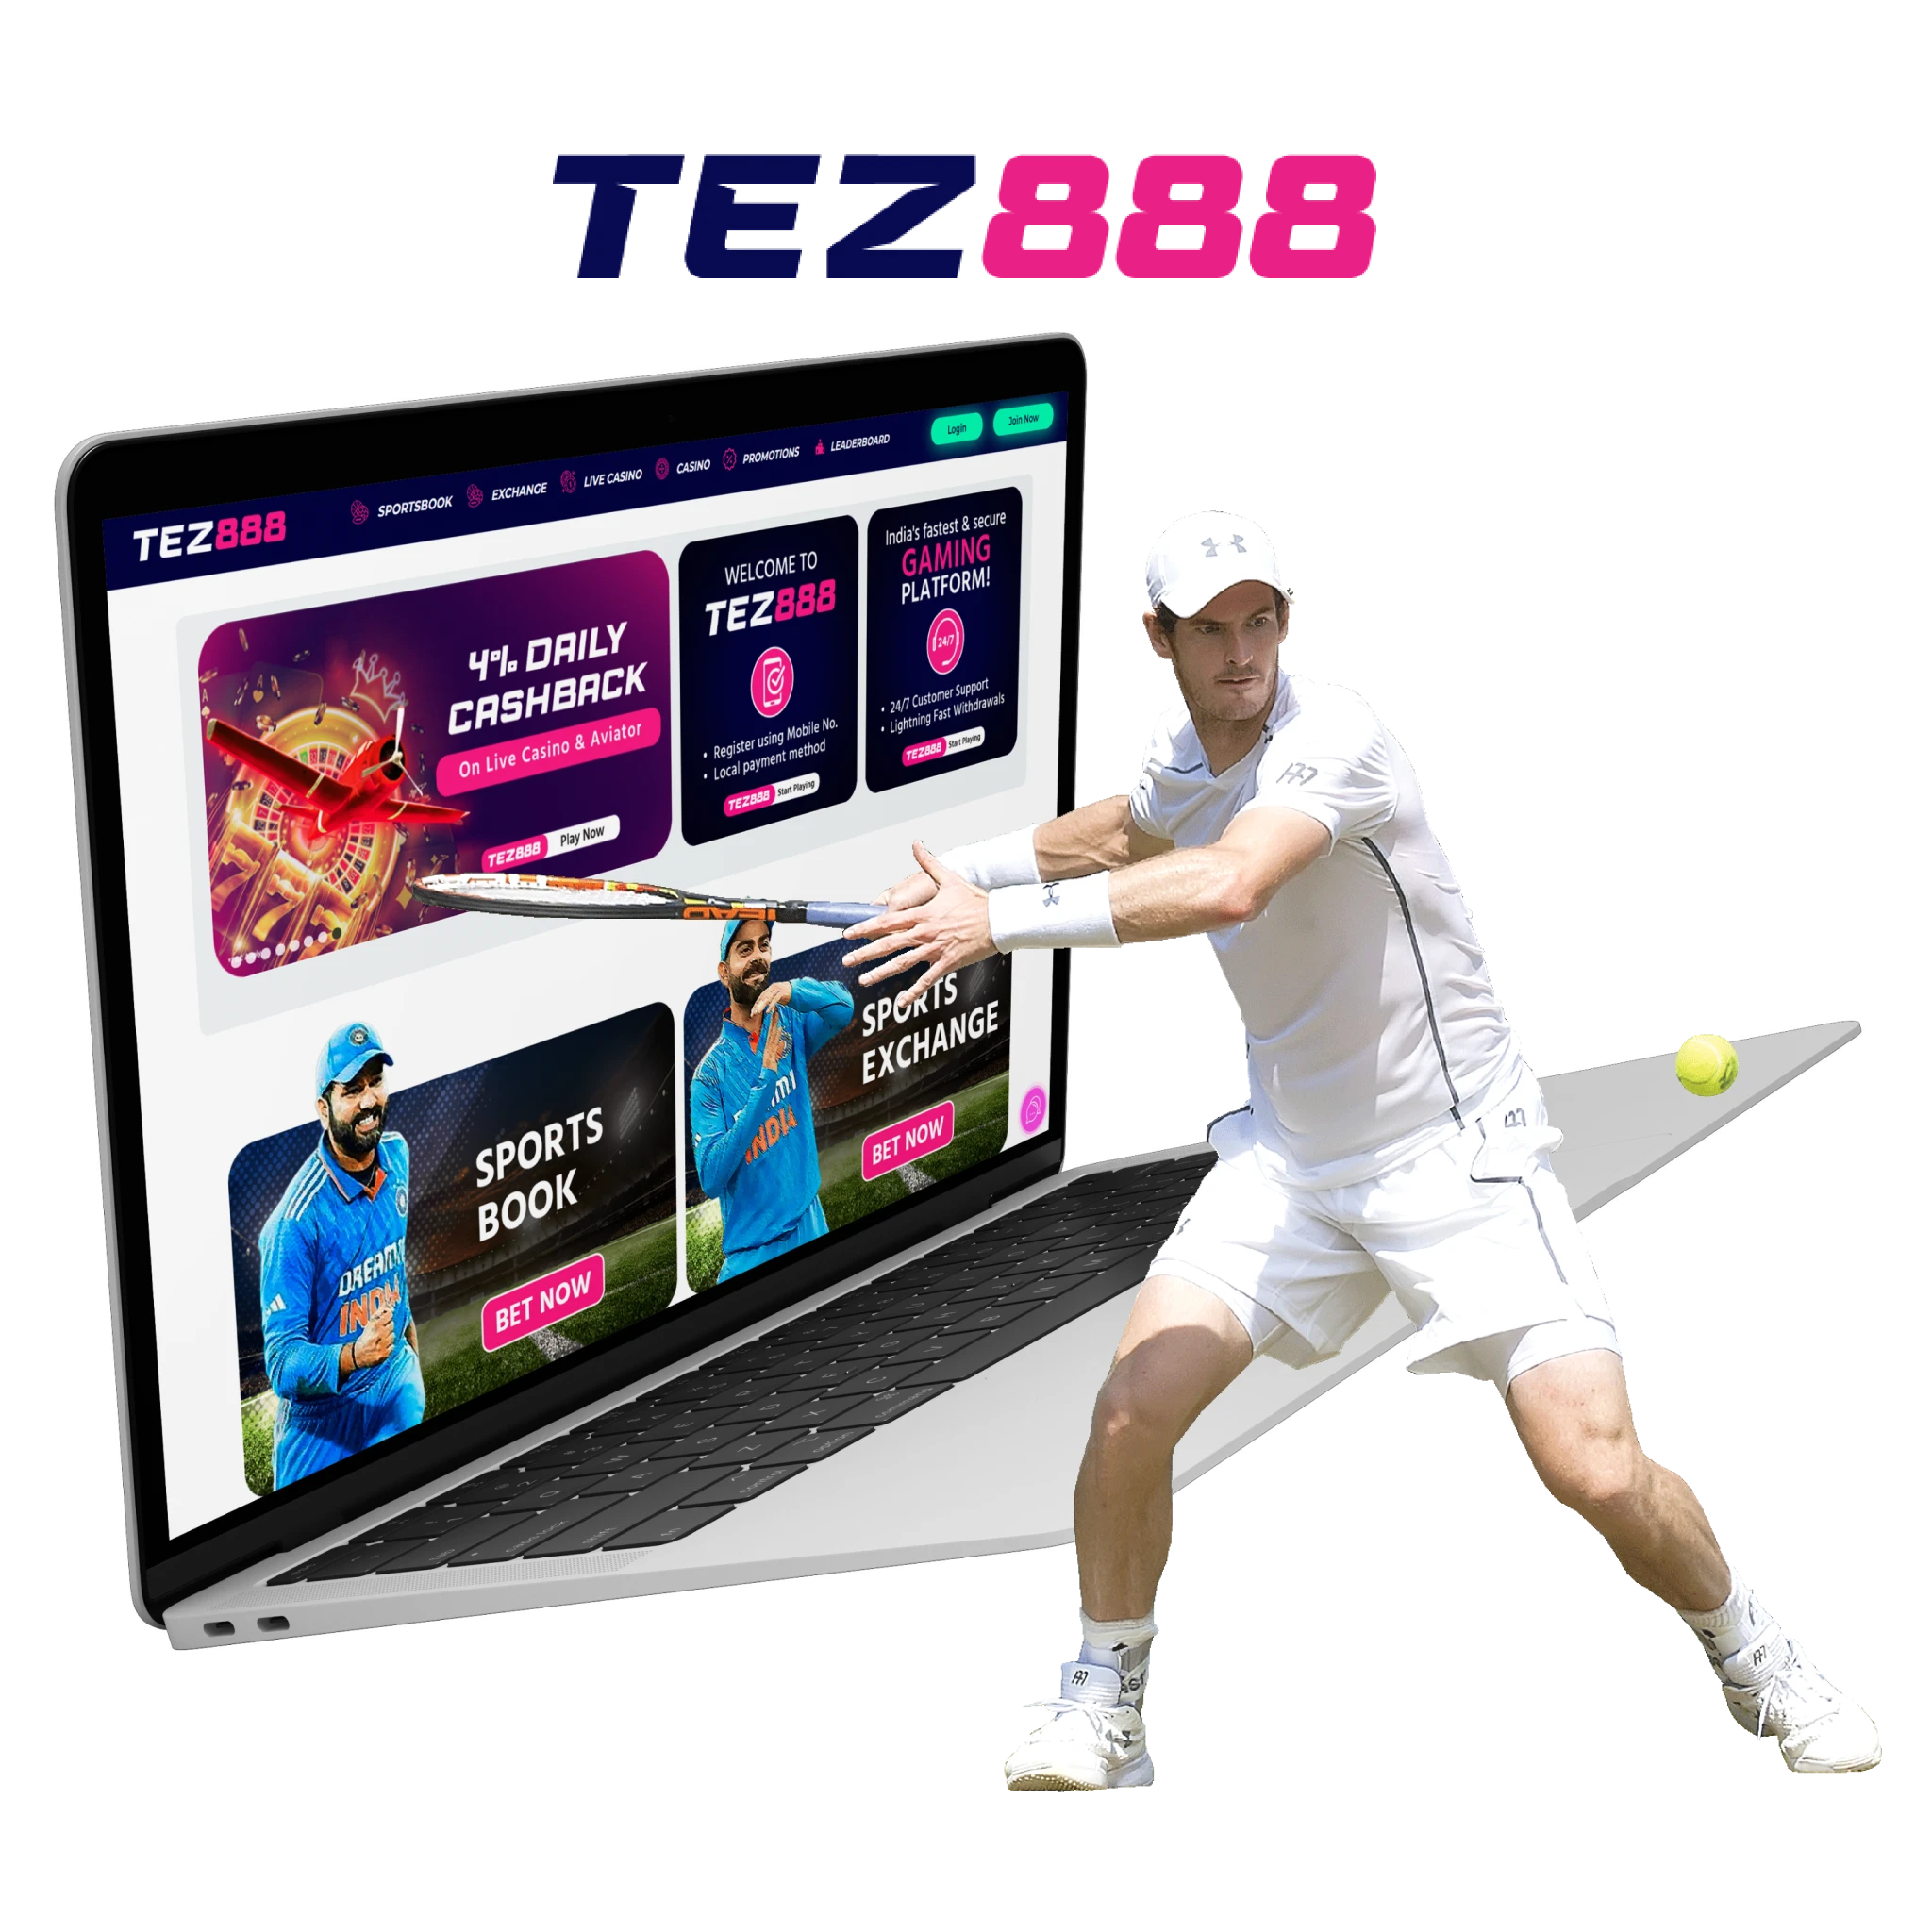 Tez888 provides all popular tournaments and leagues for chess betting.